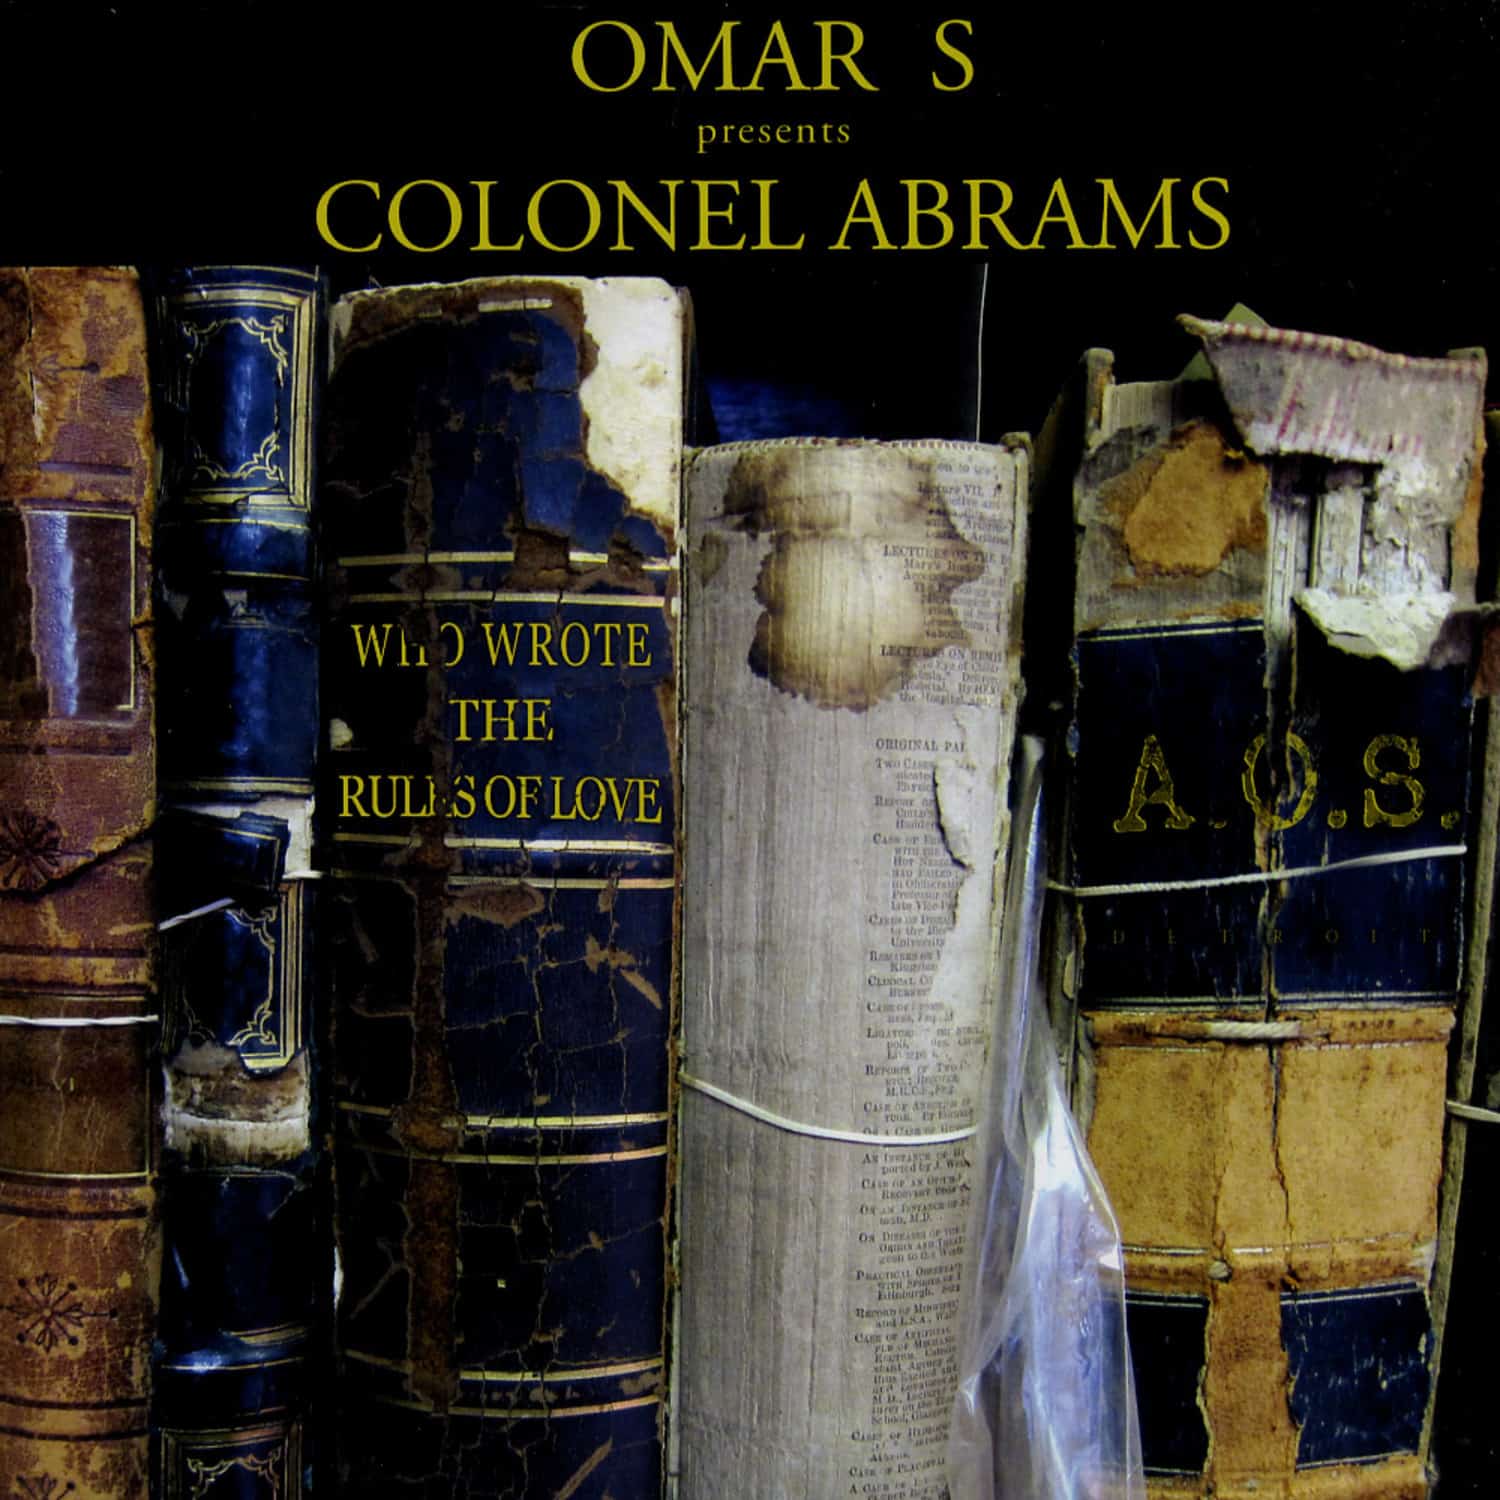 Omar S presents Colonel Abrams - WHO WROTE THE RULES OF LOVE